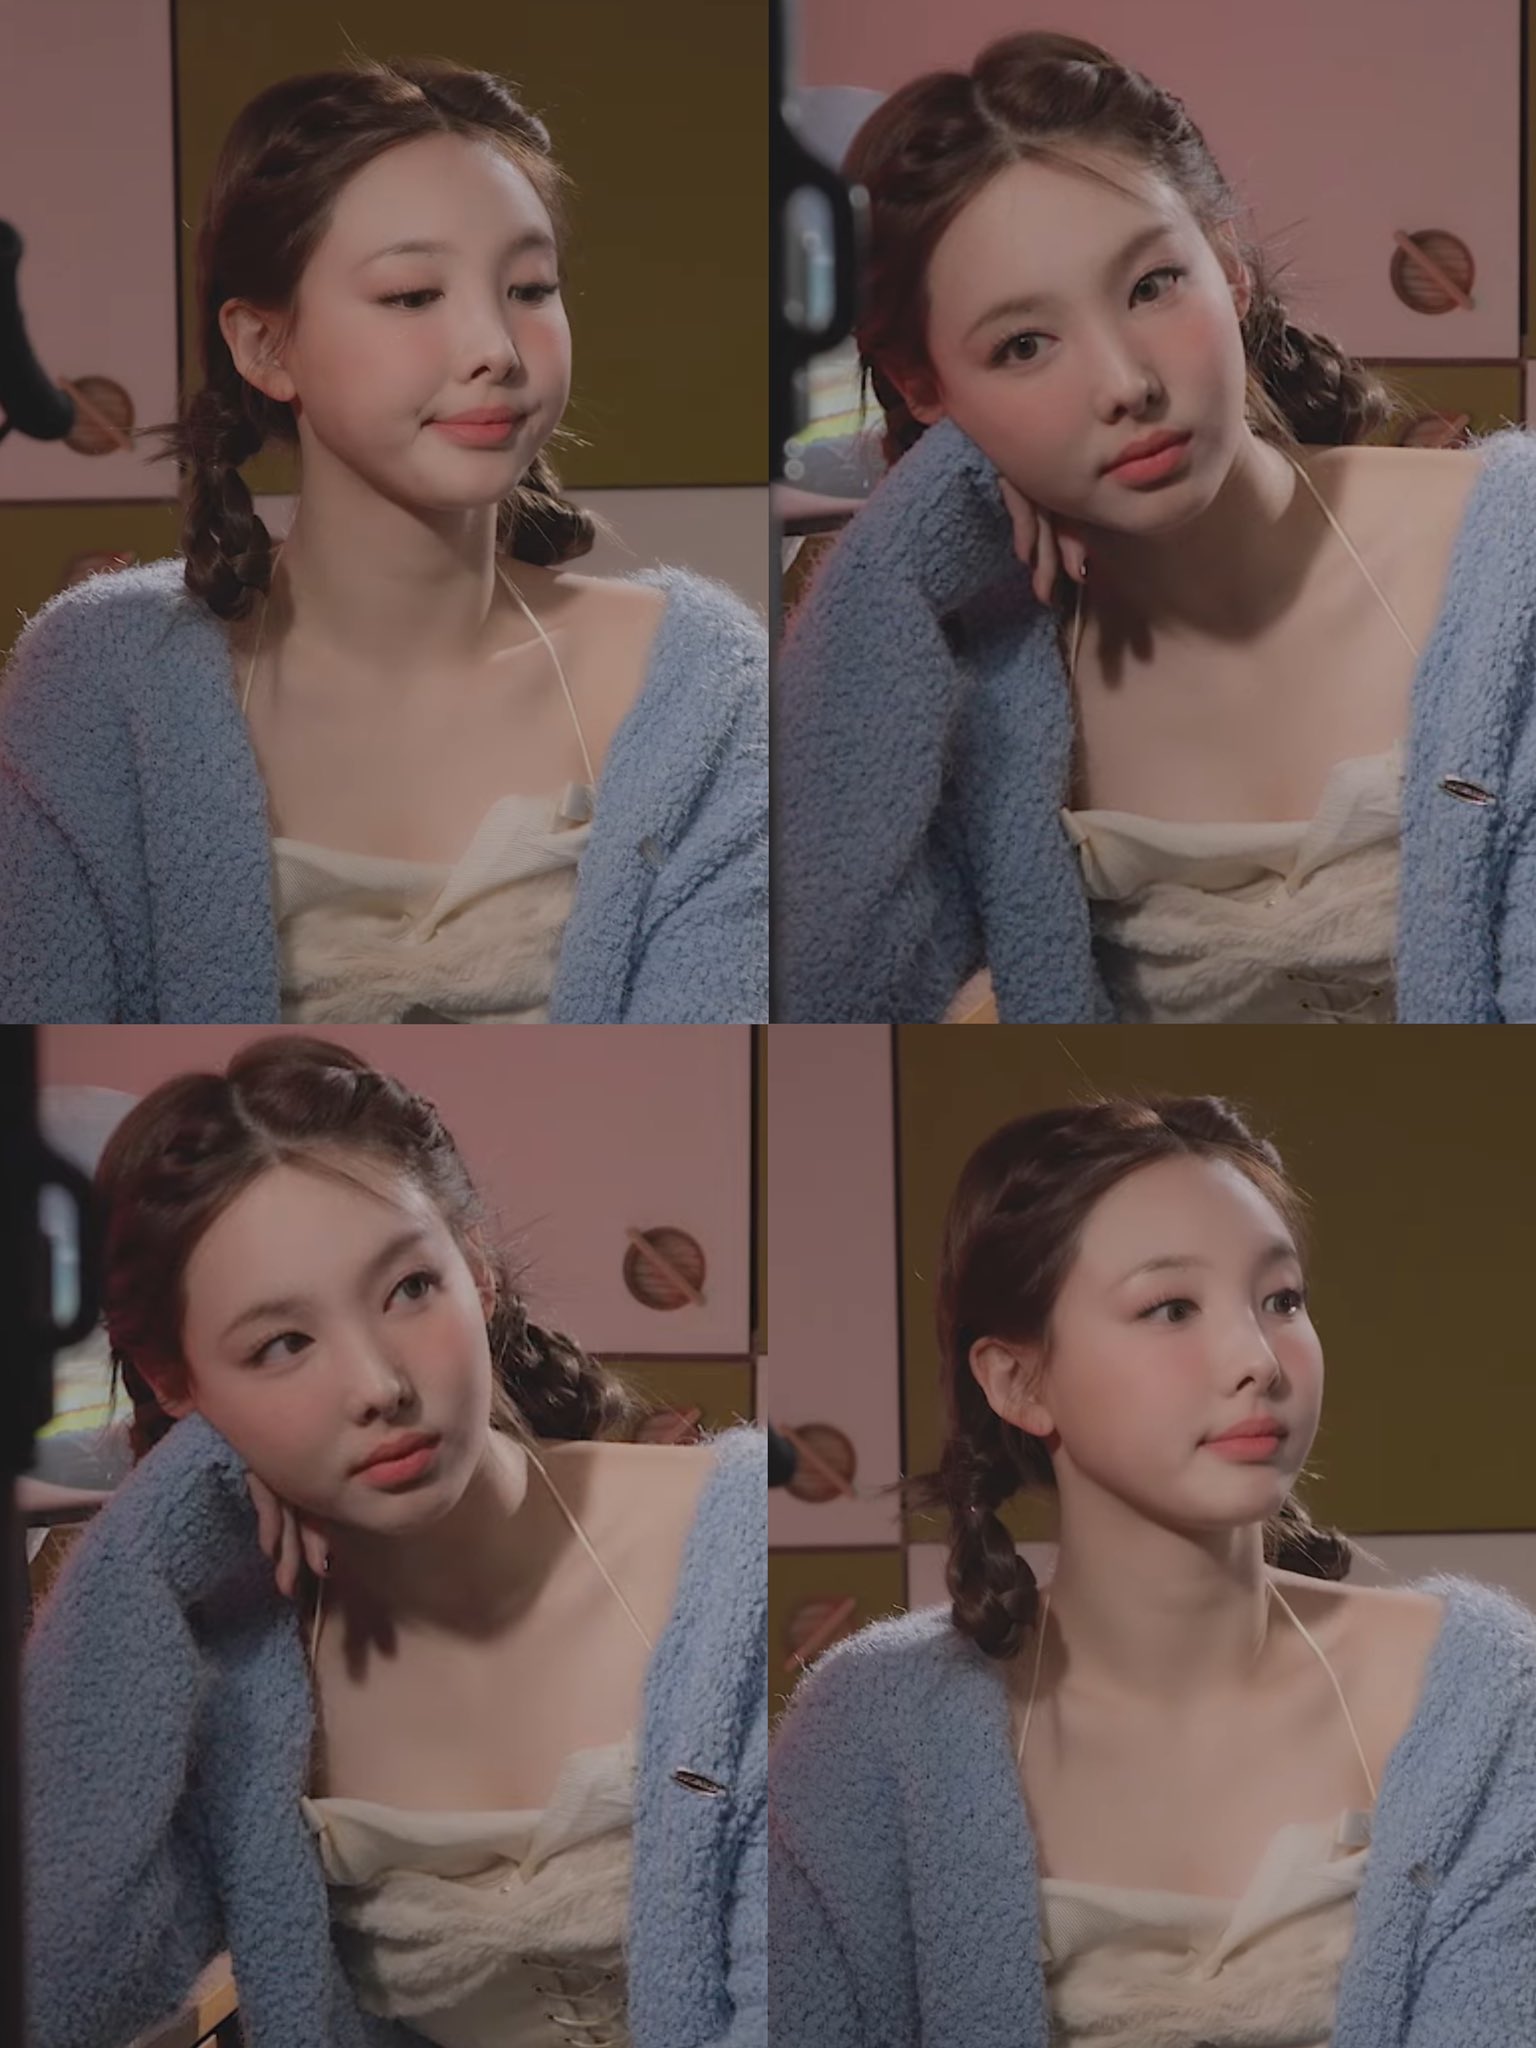 Nayeon Lesbian Protector On Twitter The Prettiest Girl Nayeon I8mo44dttj Twitter 